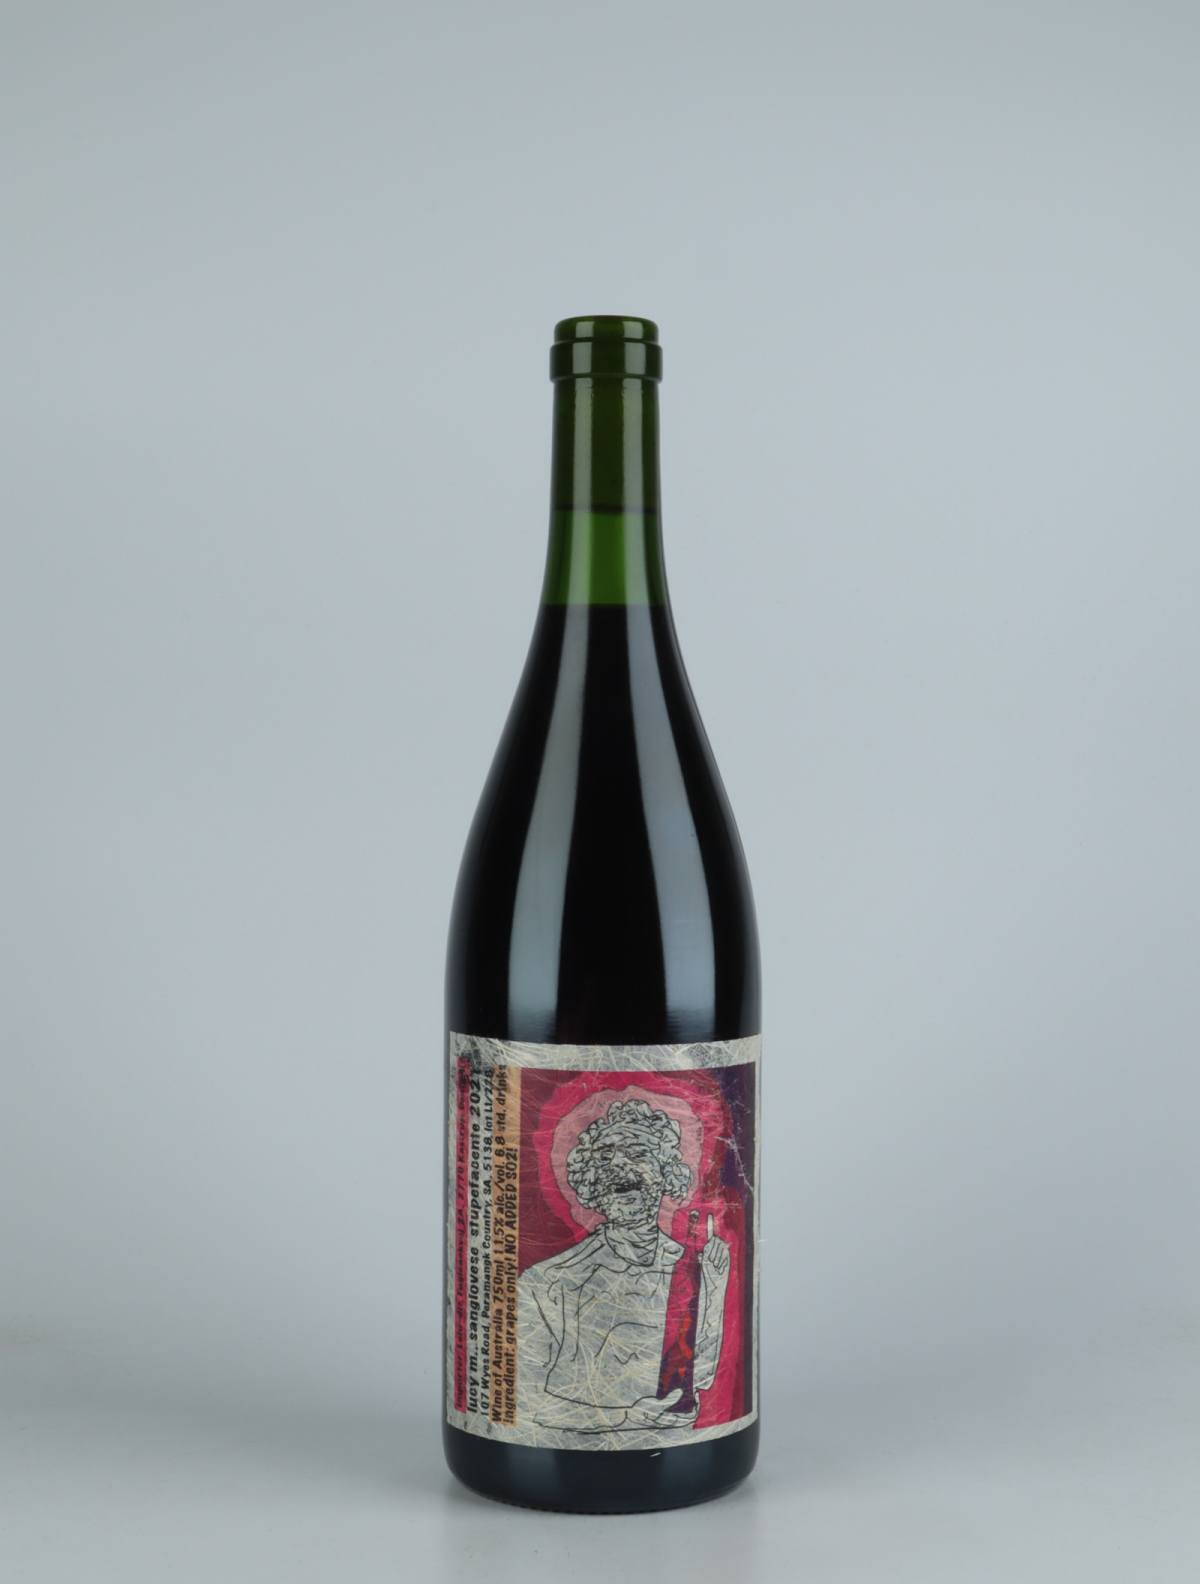 A bottle 2021 Sangiovese Stupefacente Red wine from Lucy Margaux, Adelaide Hills in Australia